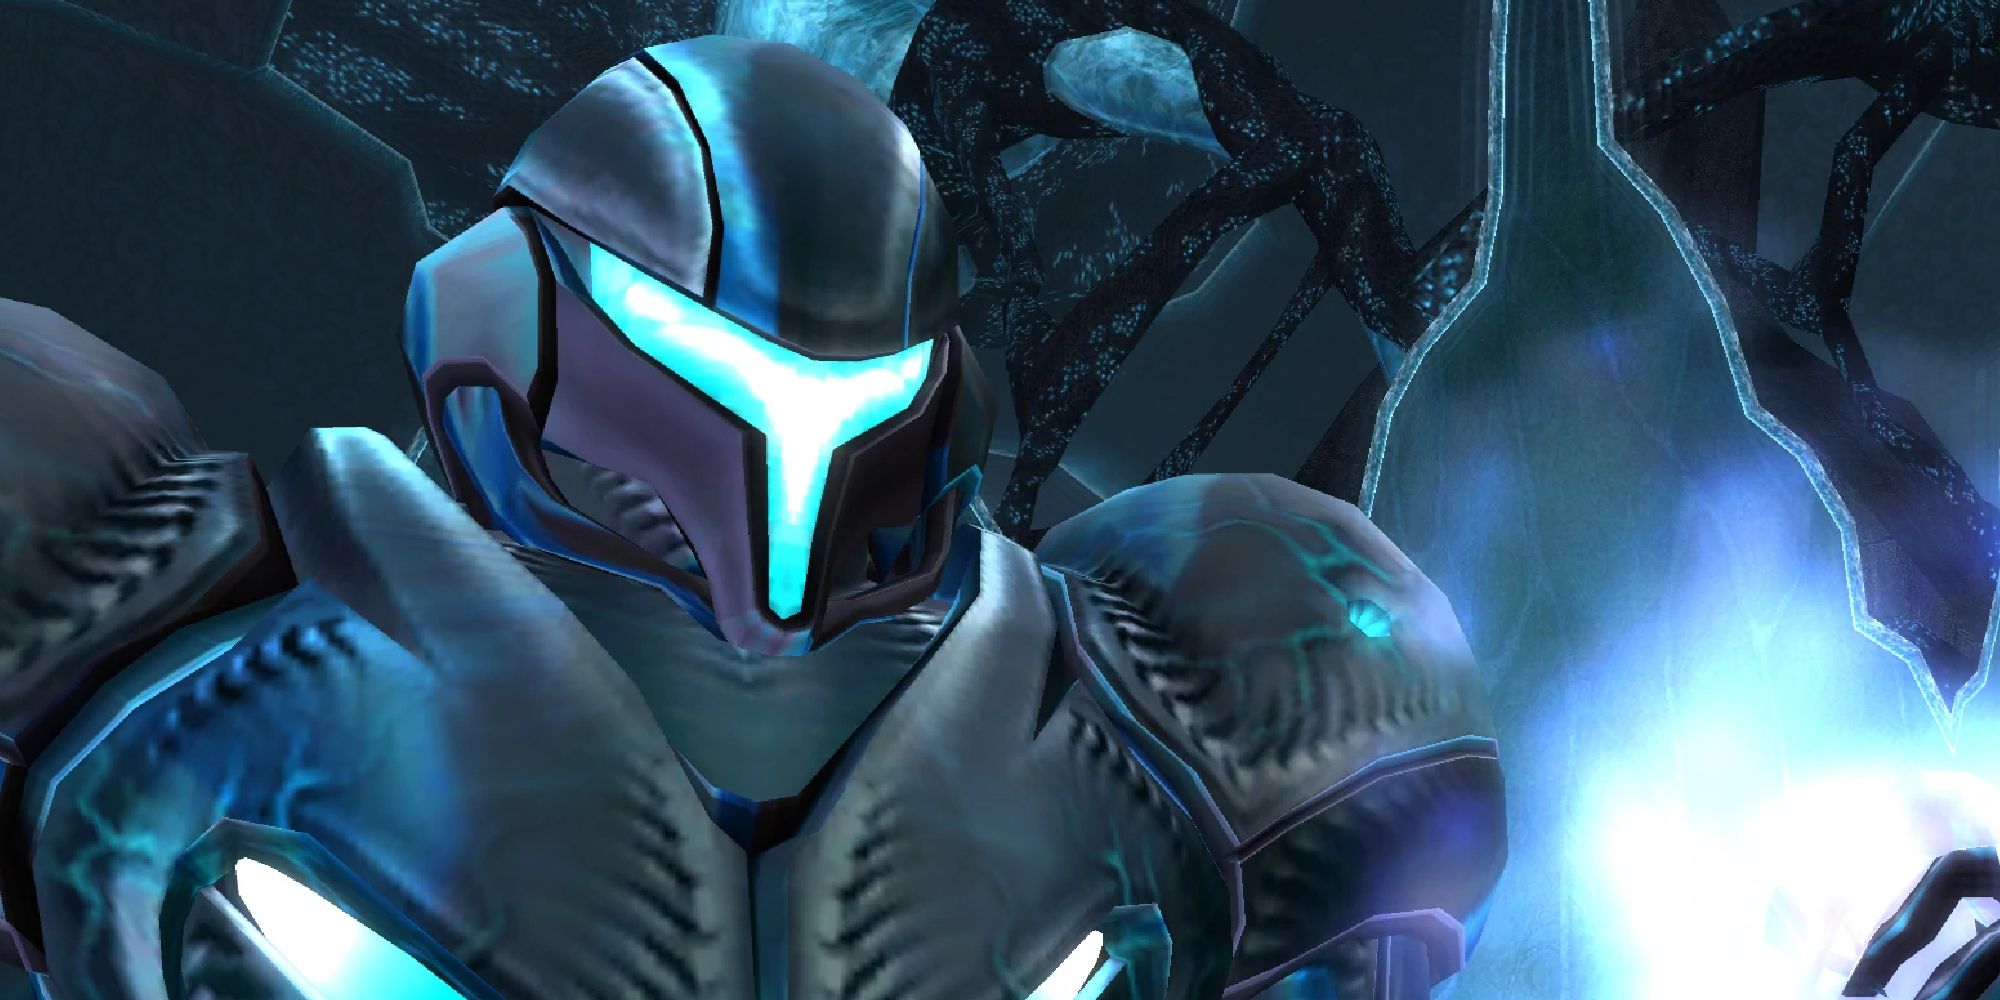 Dark Samus appearing in a cutscene from Metroid Prime 2: Echoes